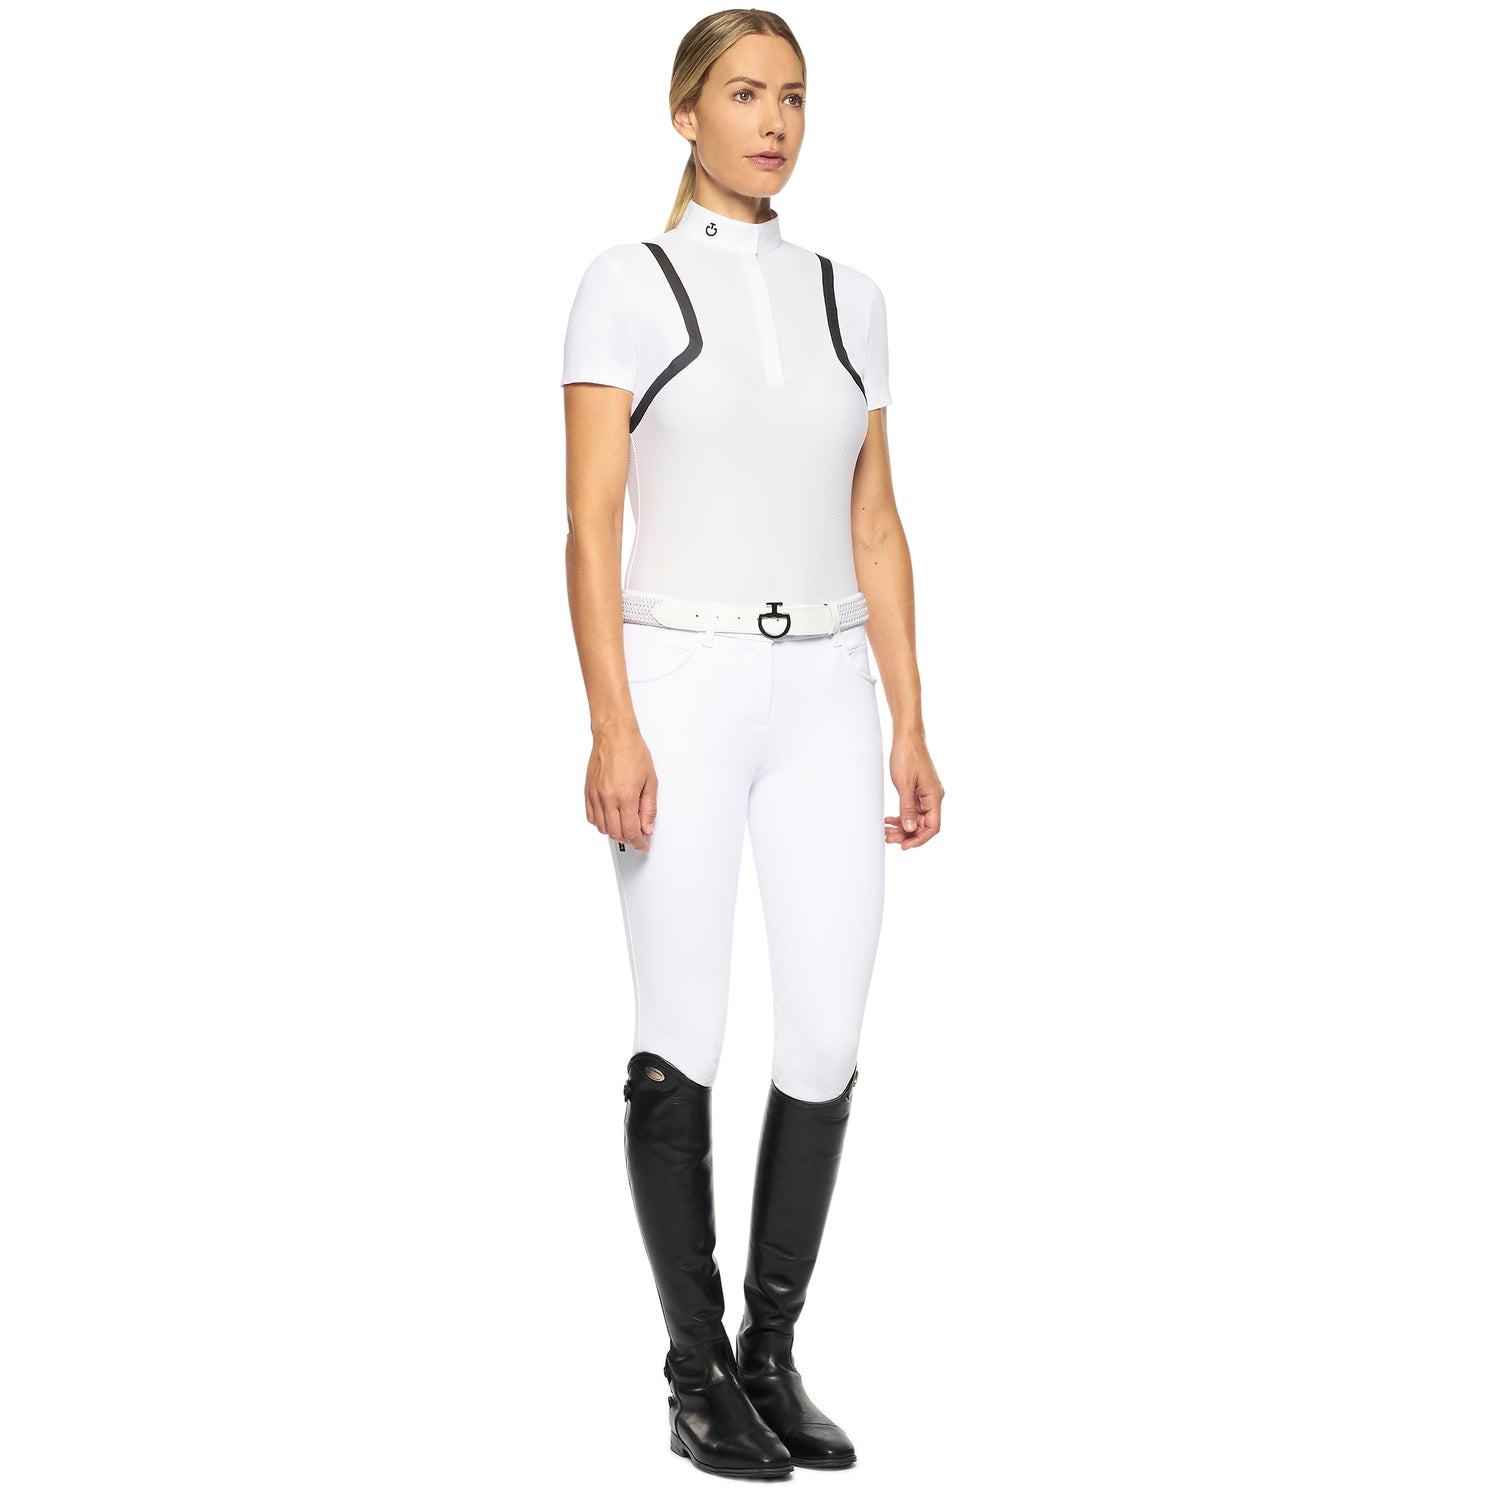 Cavalleria Toscana pique show shirt is made from soft textured jersey. A breathable show shirt with a flattering fit. Black mesh inserts give a sporty feminine look.